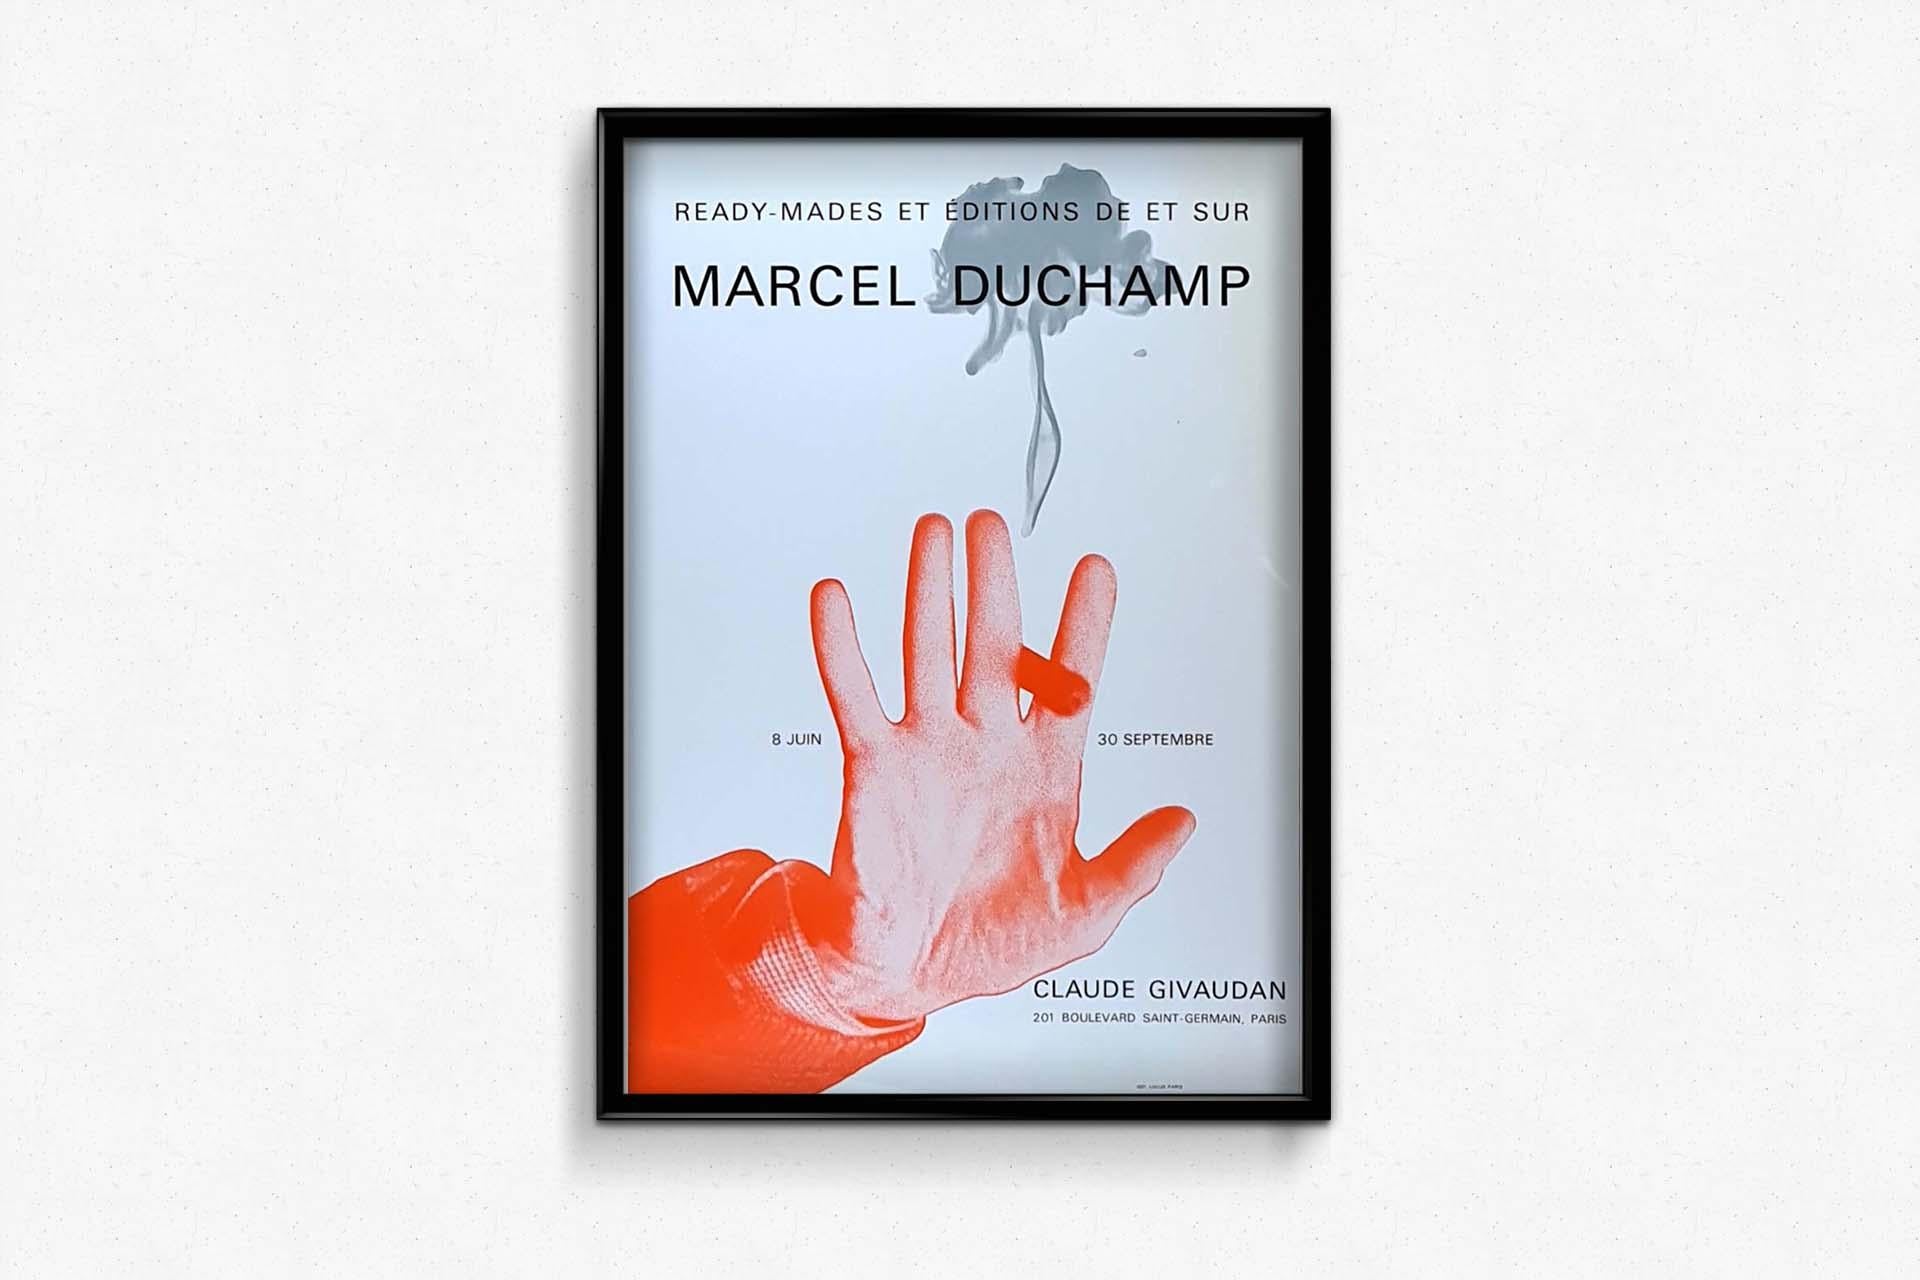 Marcel Duchamp was one of the pioneers of Dada, a movement that challenged preconceived notions of what art should be and how it should be made. In the years leading up to World War I, Duchamp enjoyed success as a painter in Paris. But he soon